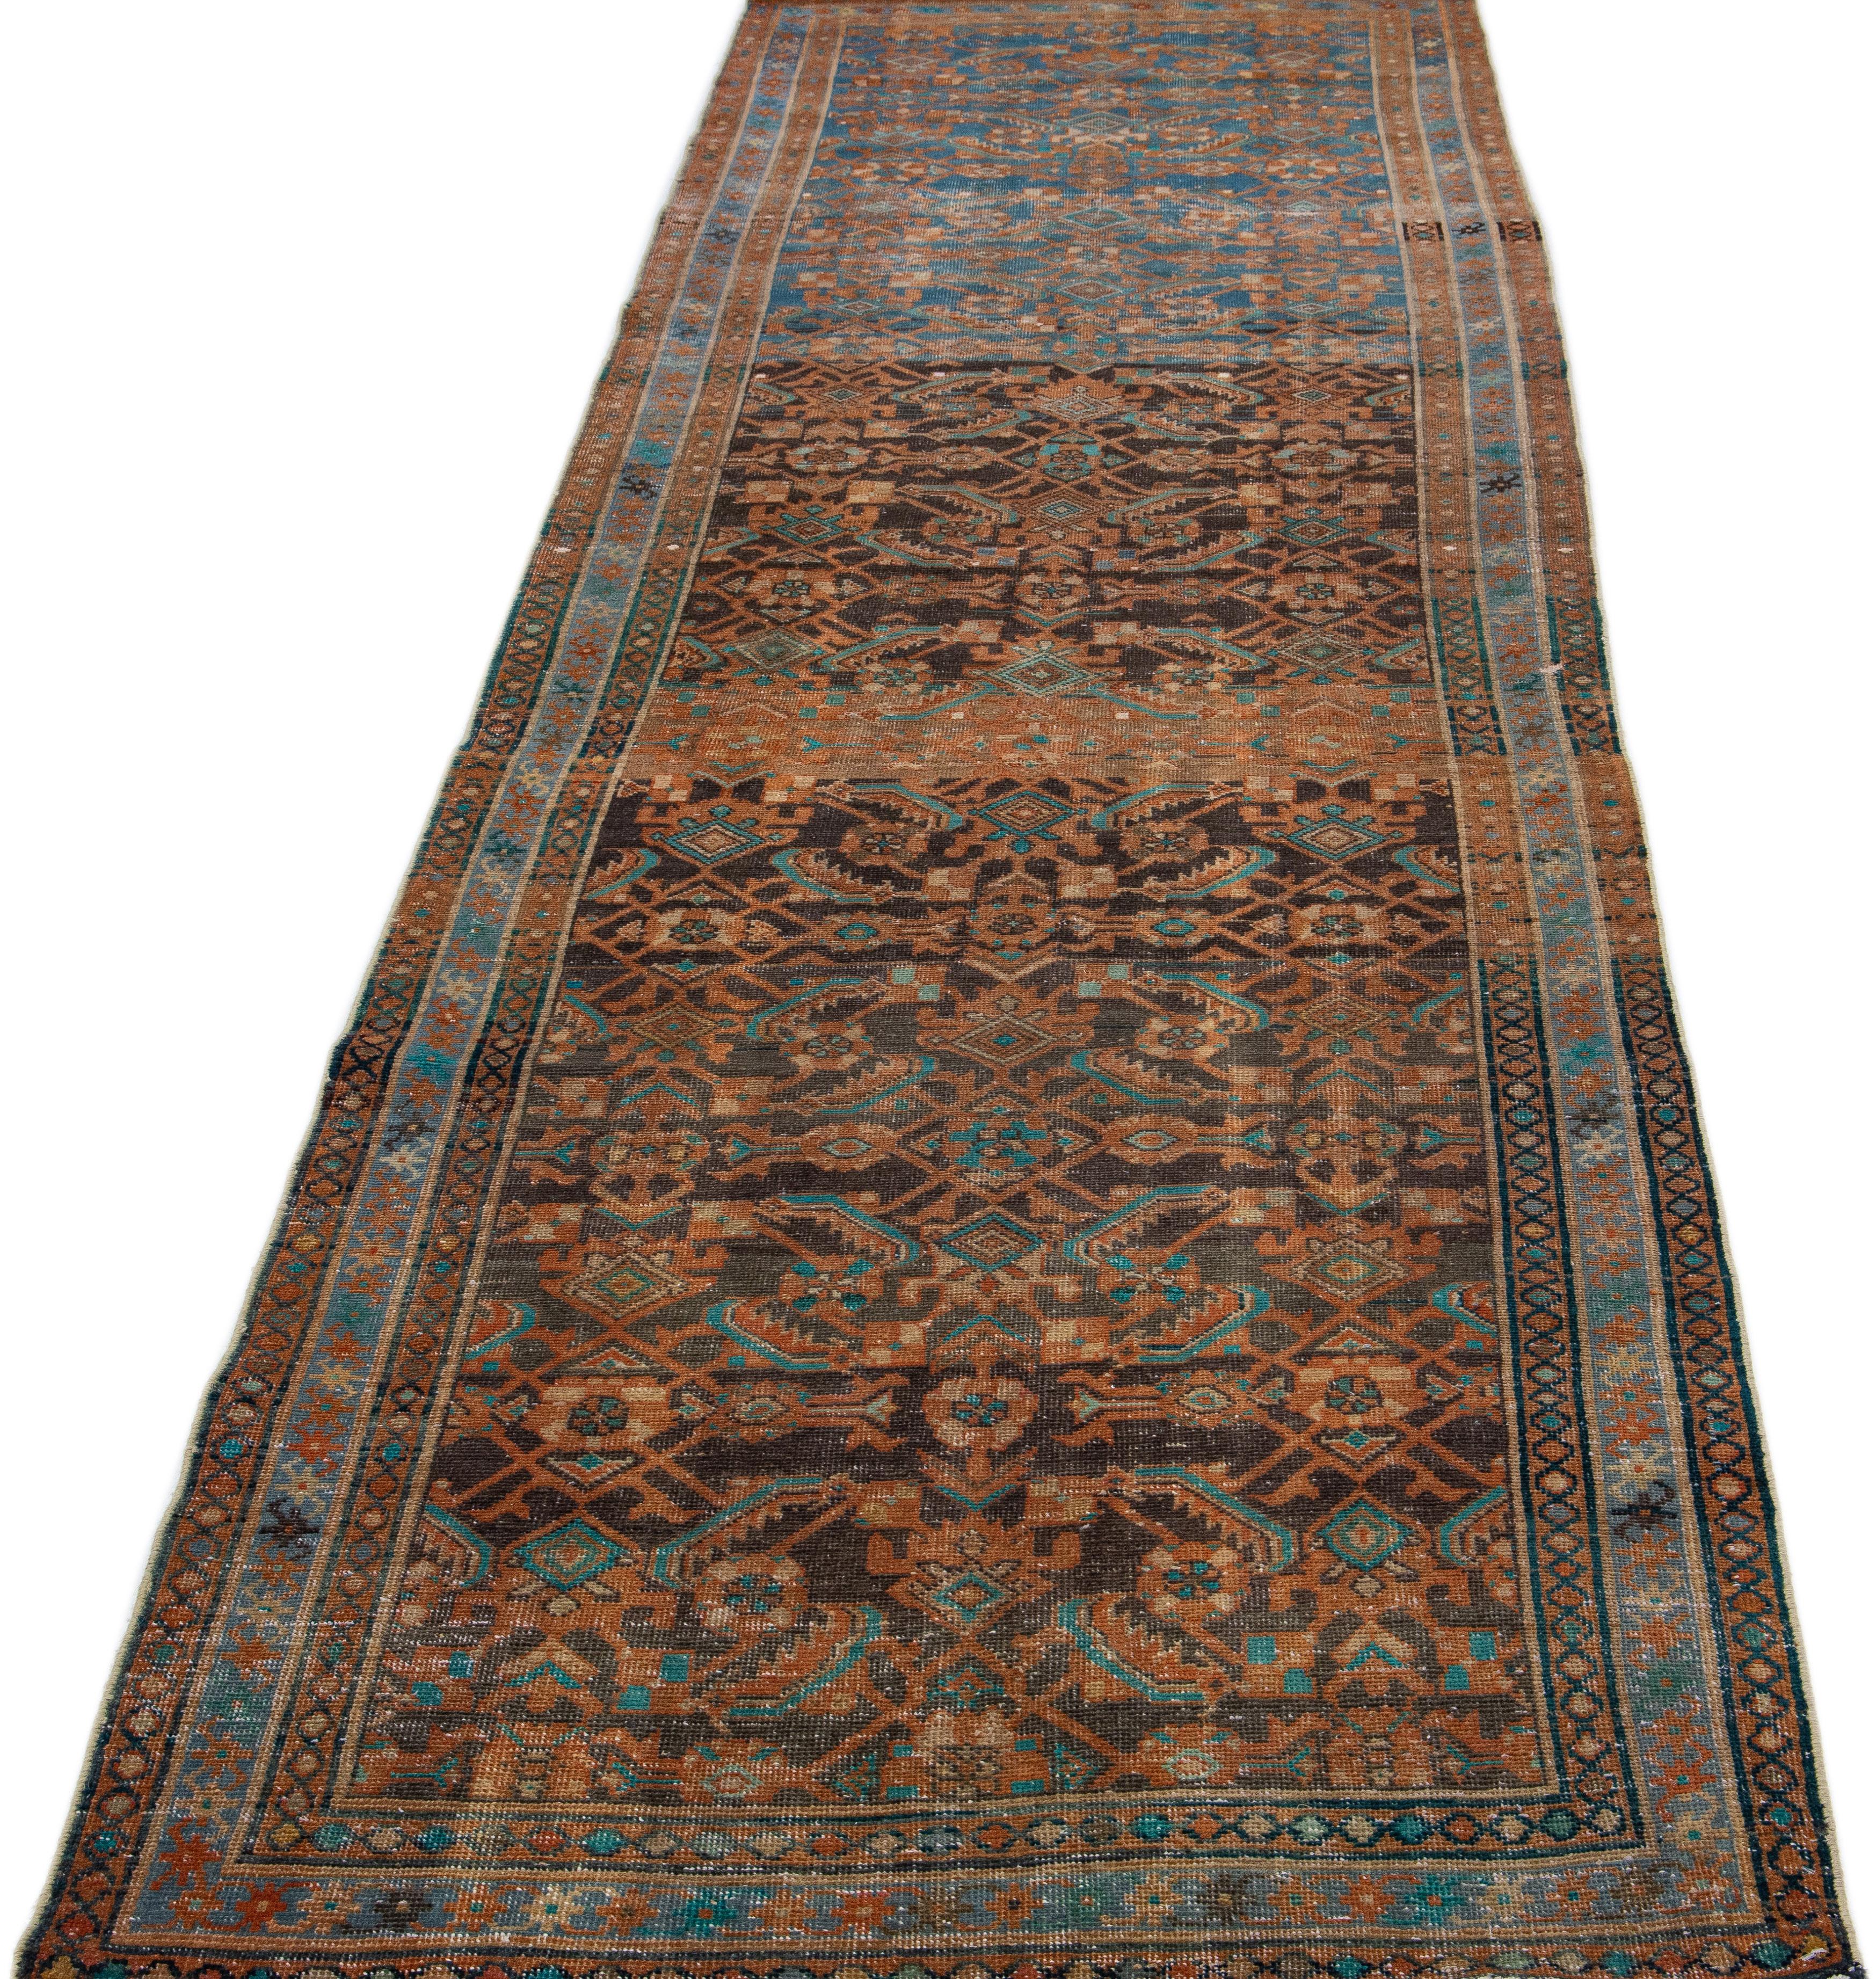 Beautiful vintage Malayer Persian runner rug with a blue field. This piece has brown, teal, and rust accents with an all-over geometric floral design. 

This rug measures 4'2